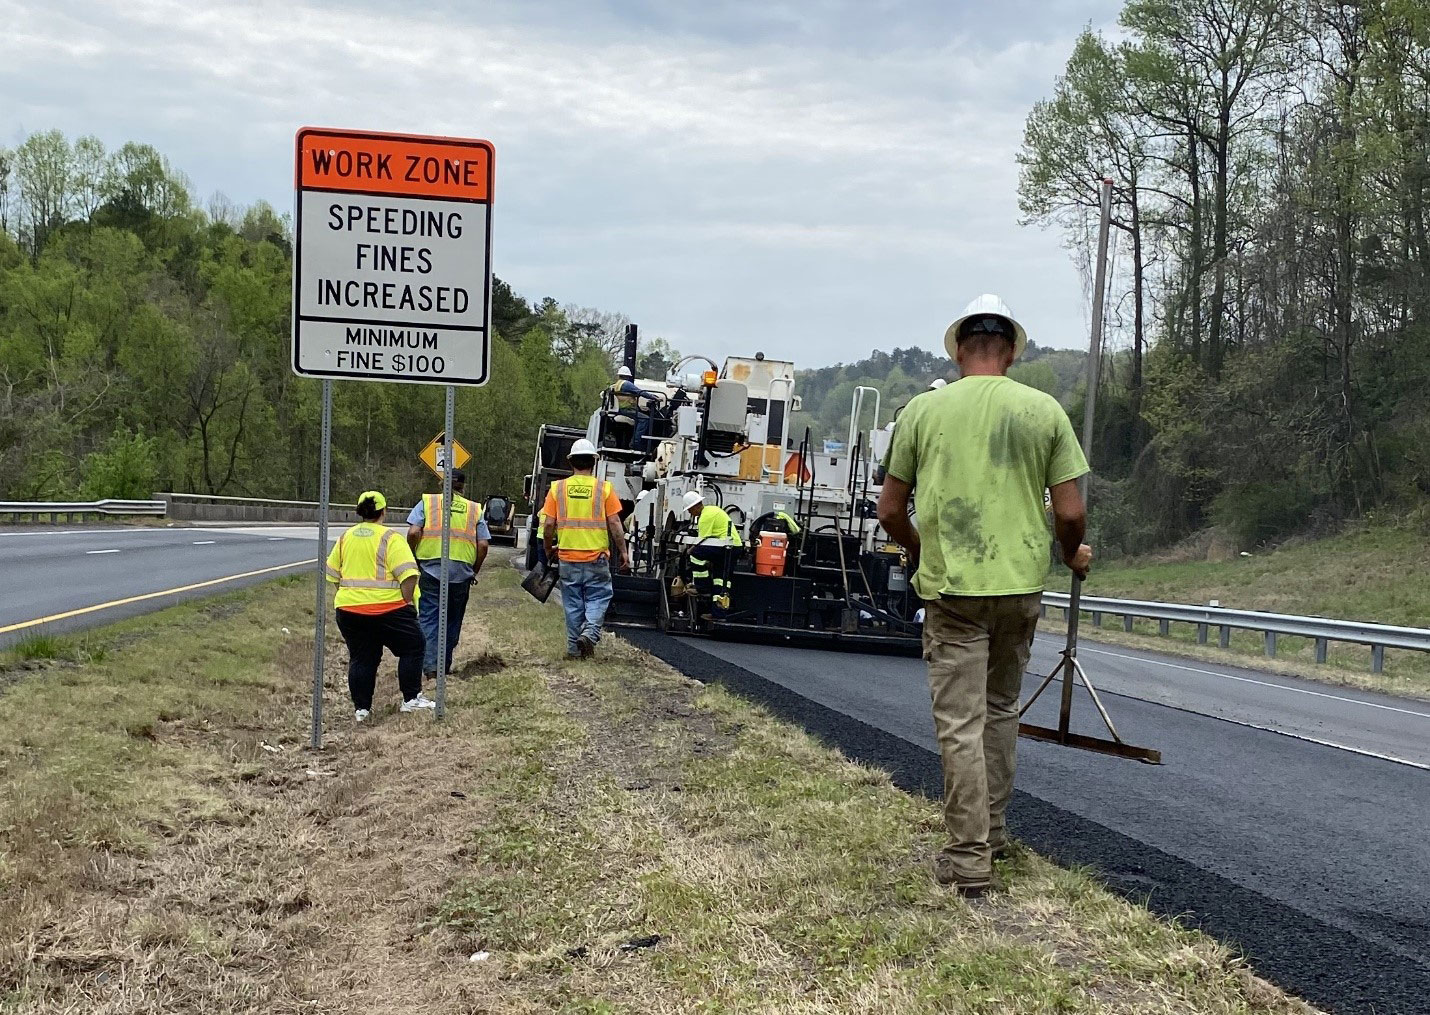 4-lane divided highway with work crew installing asphalt on the inside lane of the right side of the image. An inspector stands in the median near a sign.